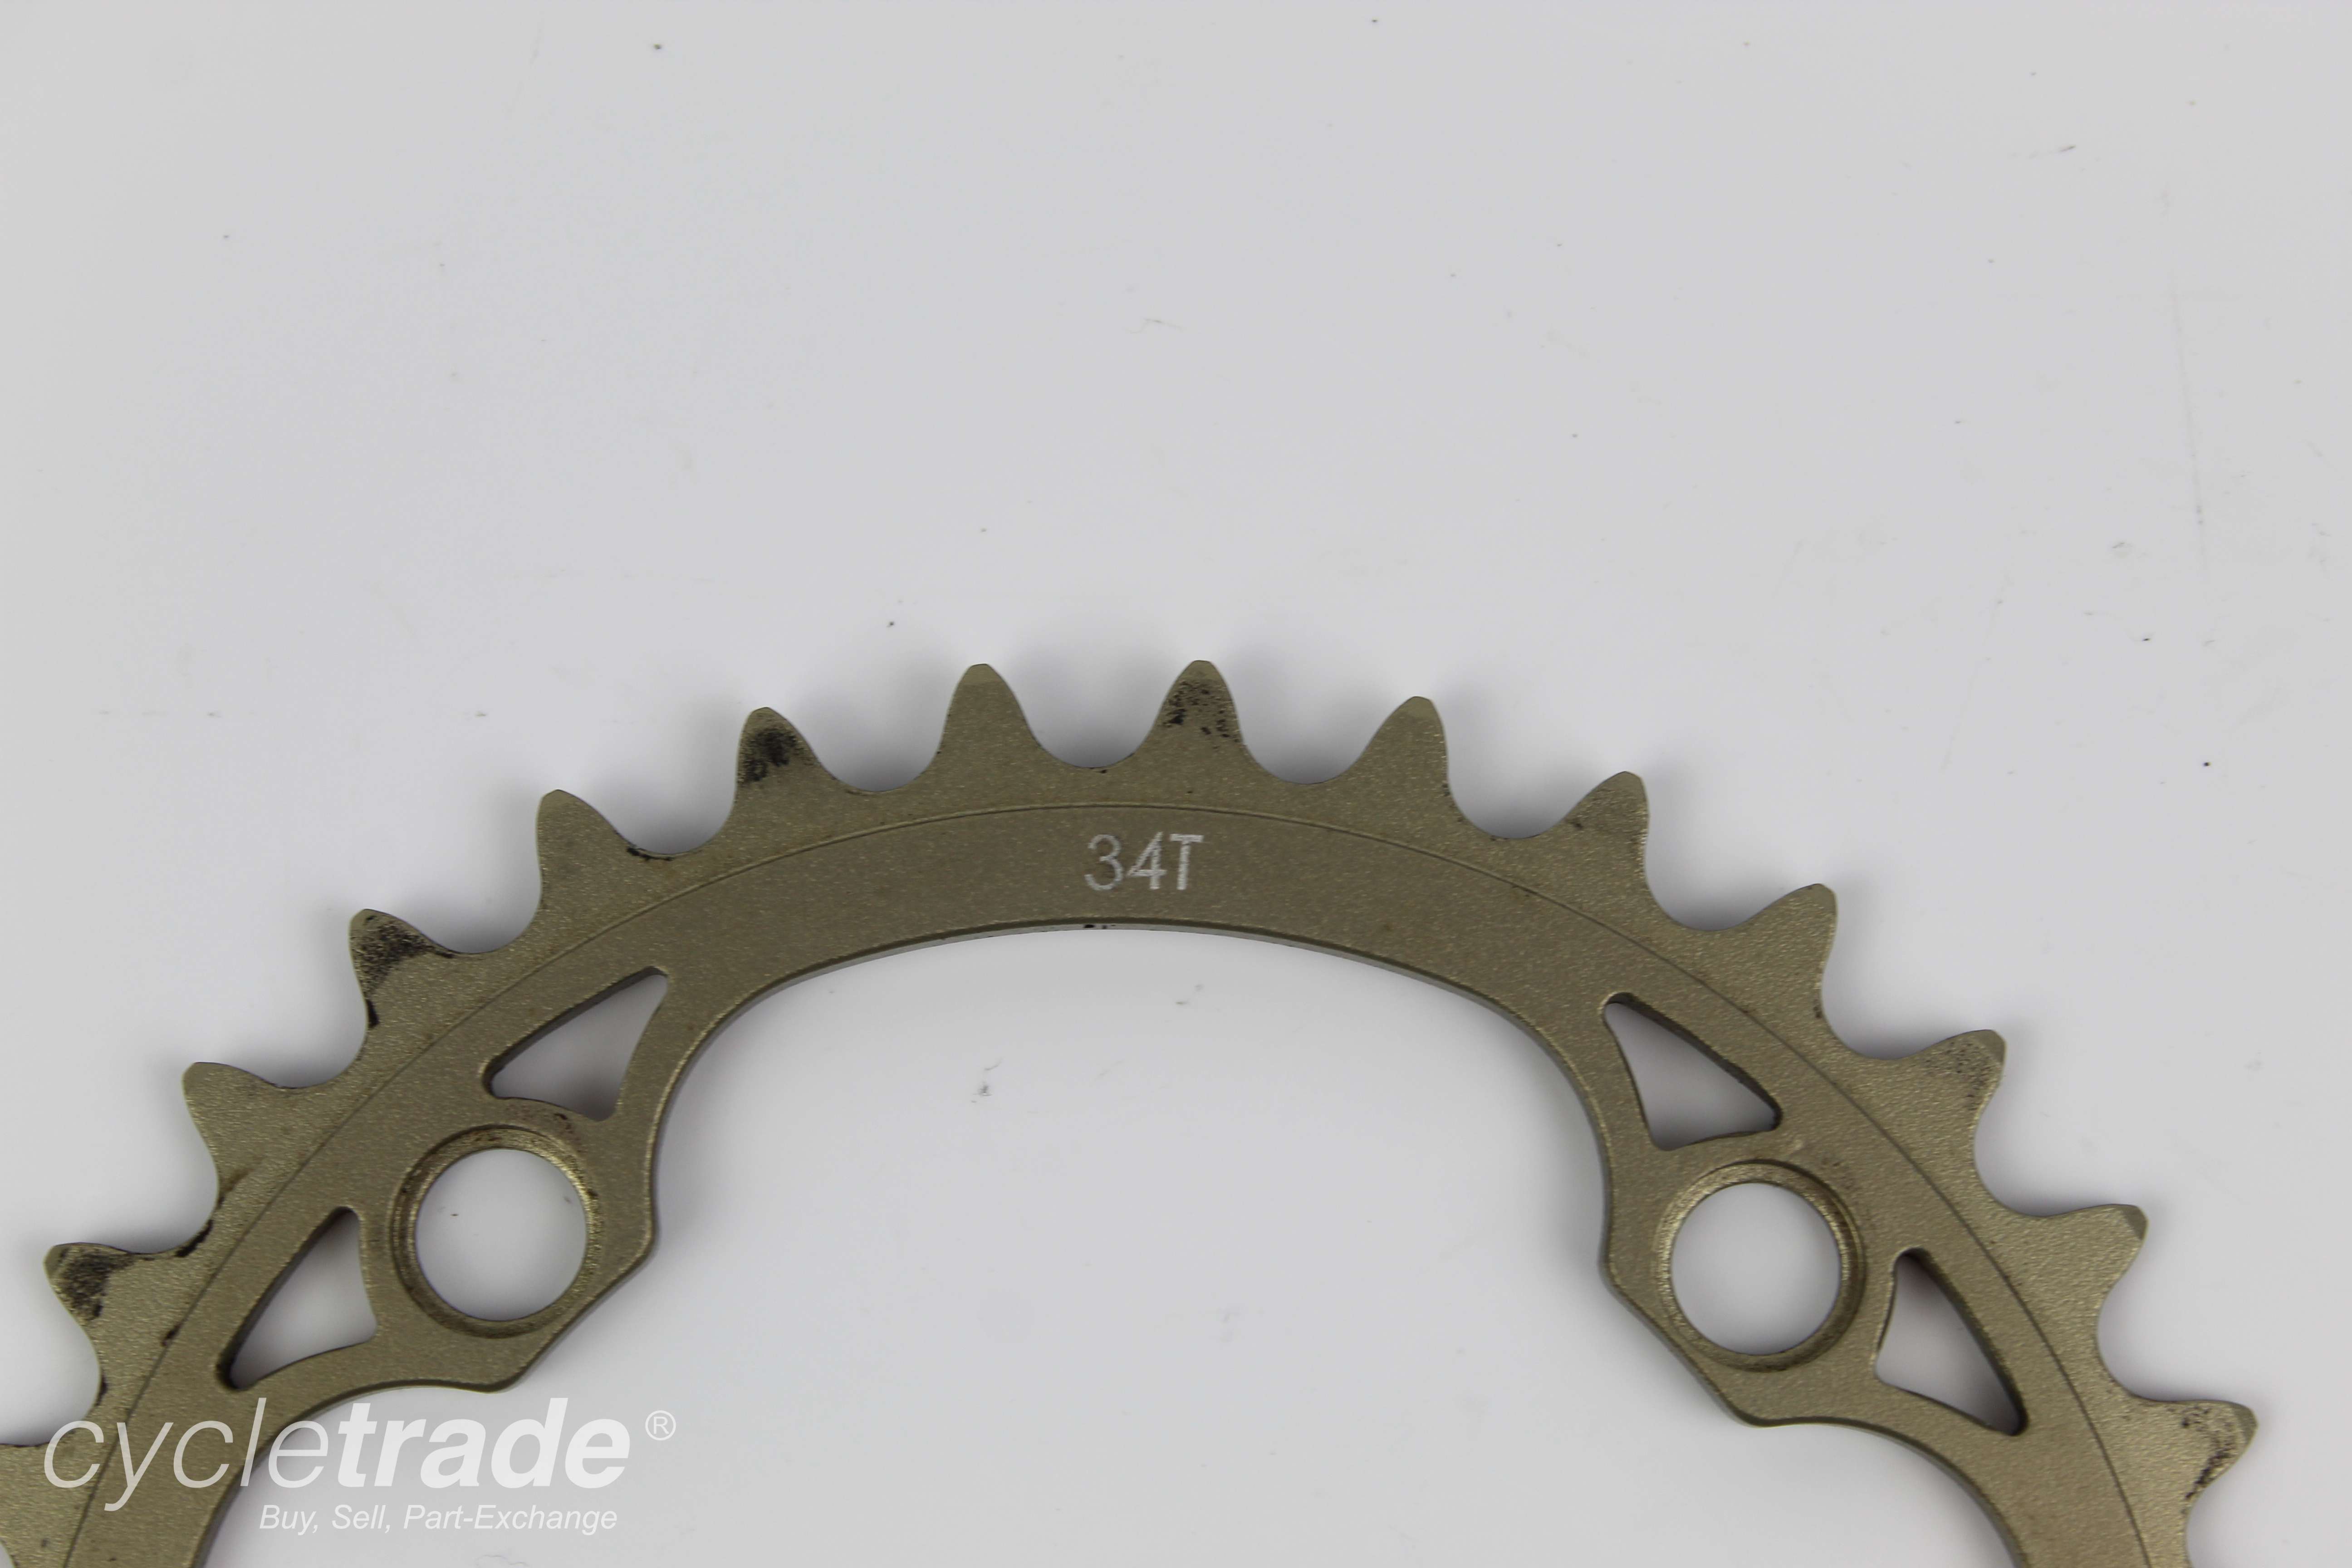 MTB Chainring- Middle/Outer 32T 104BCD Gold- Grade B